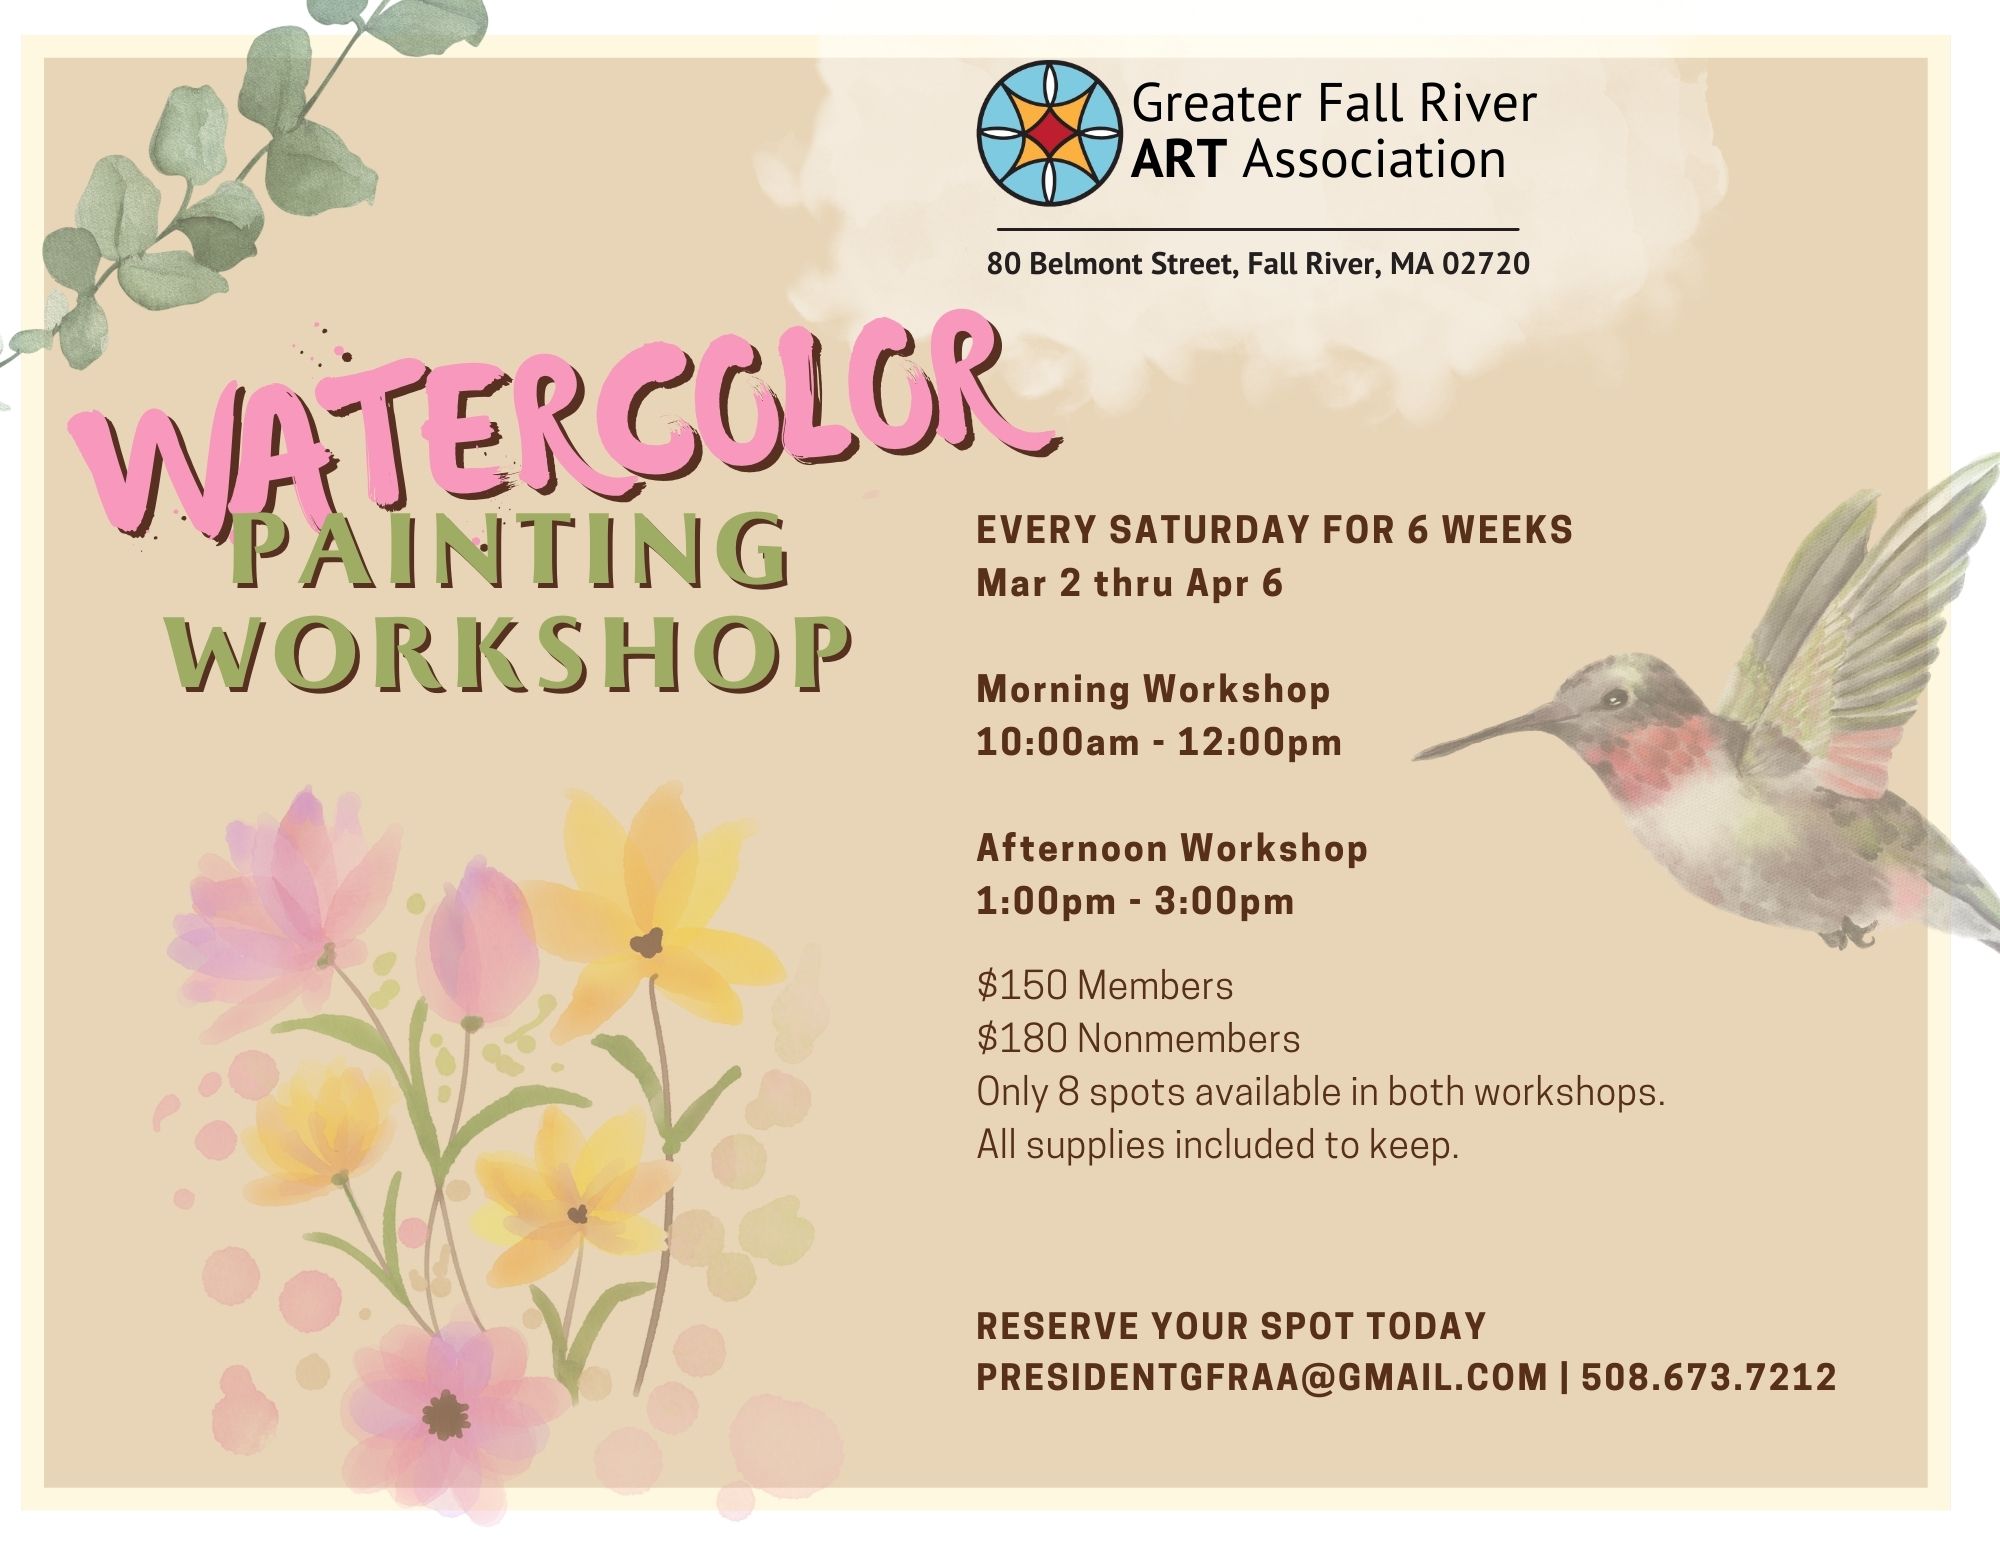 Watercolor Painting Workshops offered in March